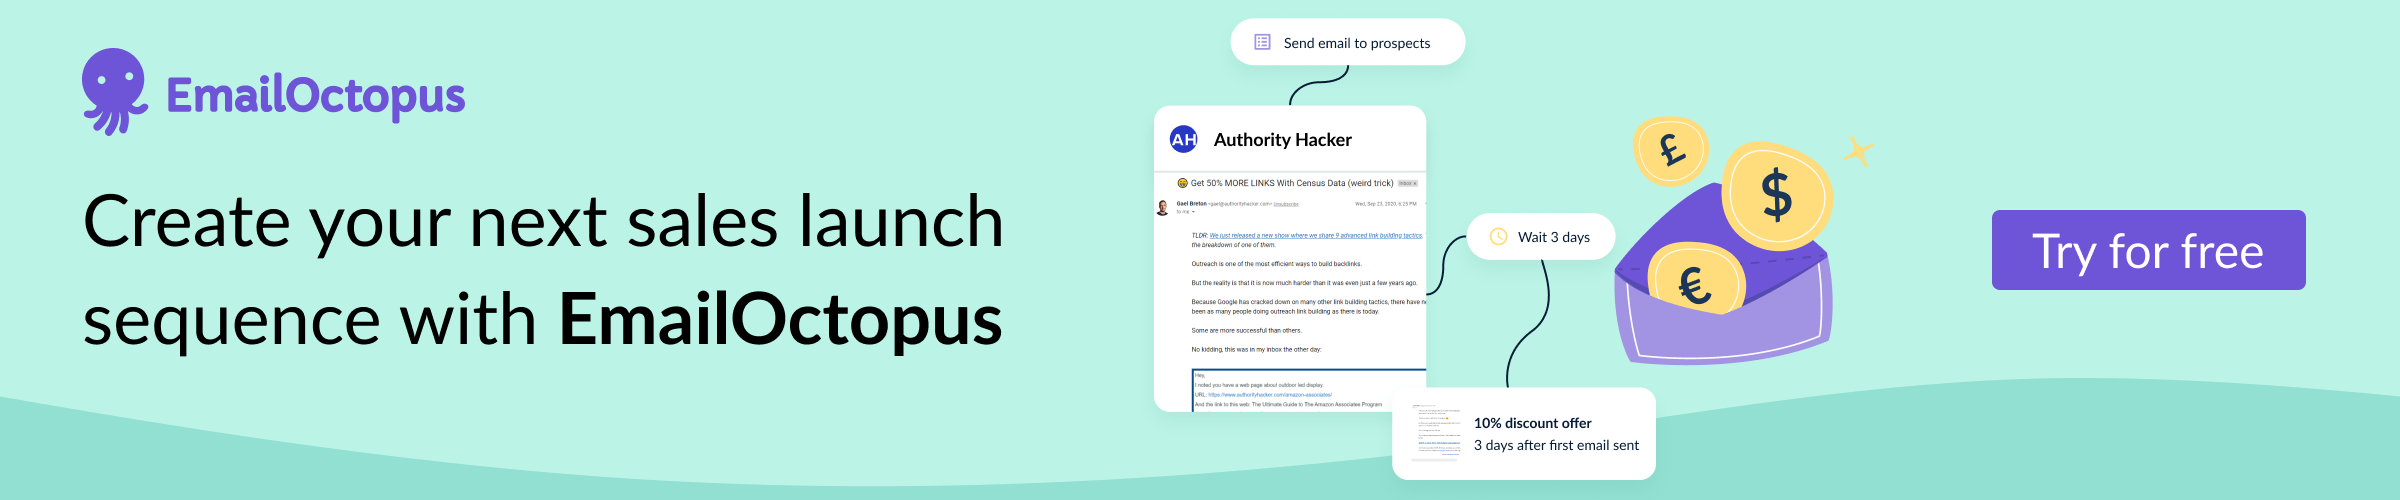 Create your next sales launch sequence with EmailOctopus